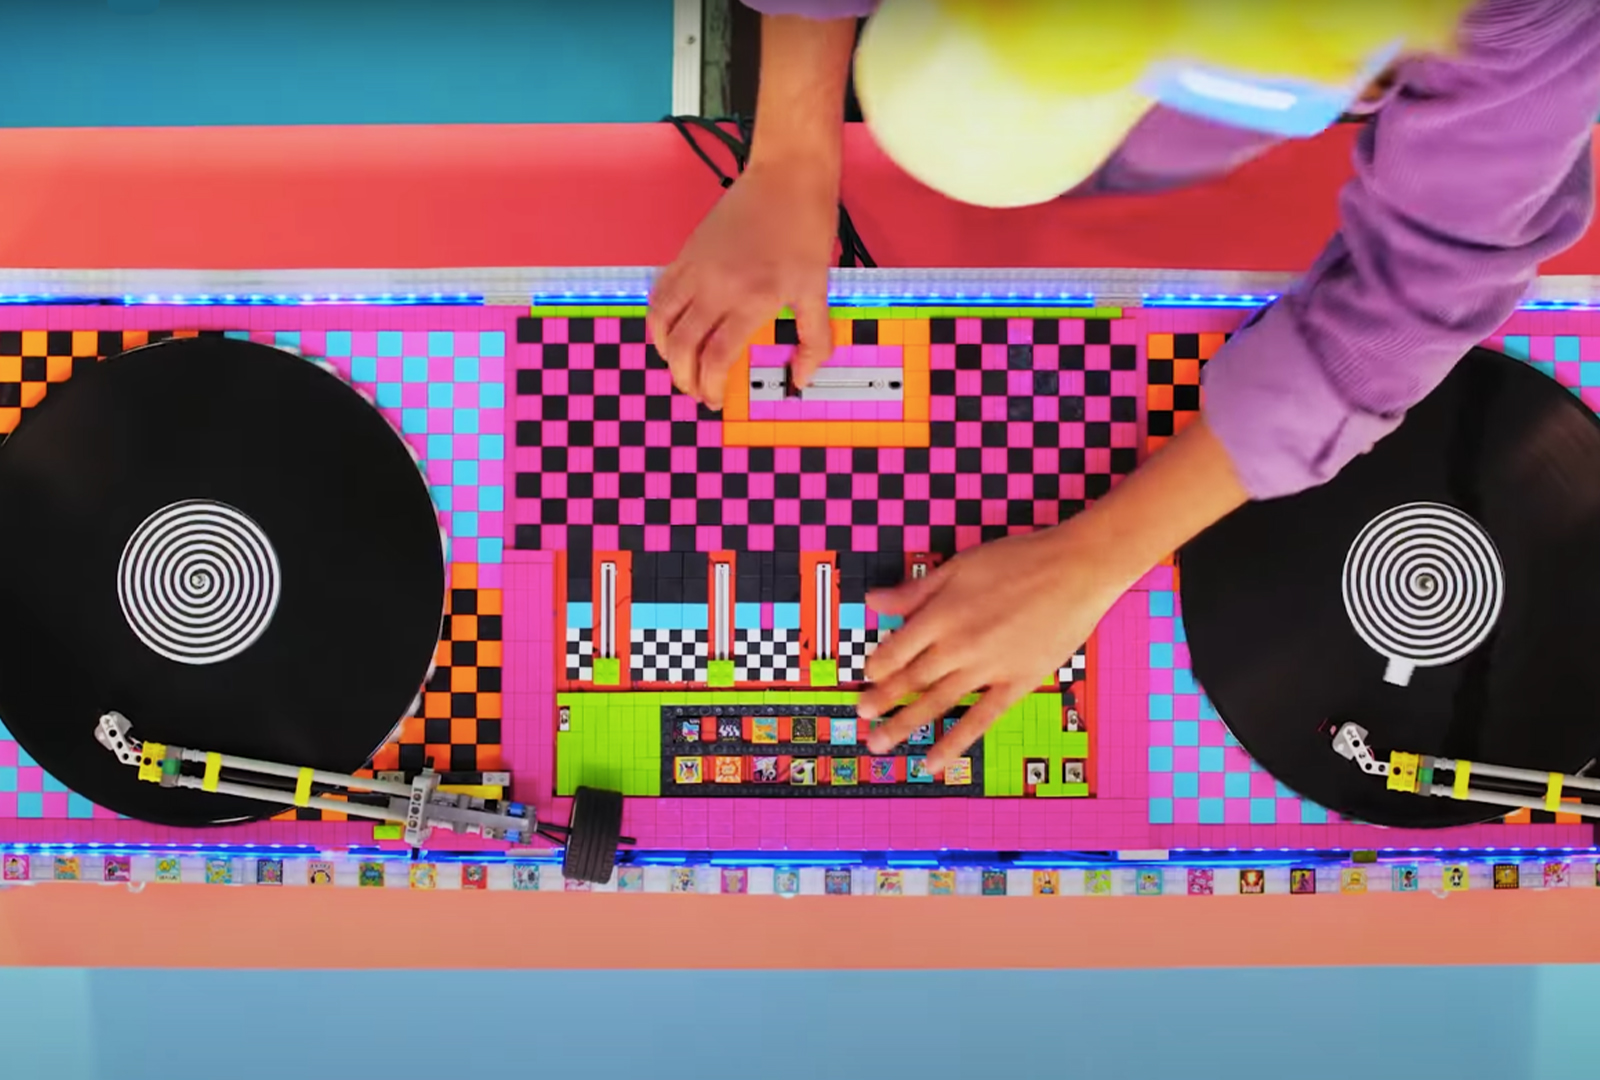 A Musician Built a Functionning Set of DJ decks Made Out of LEGO